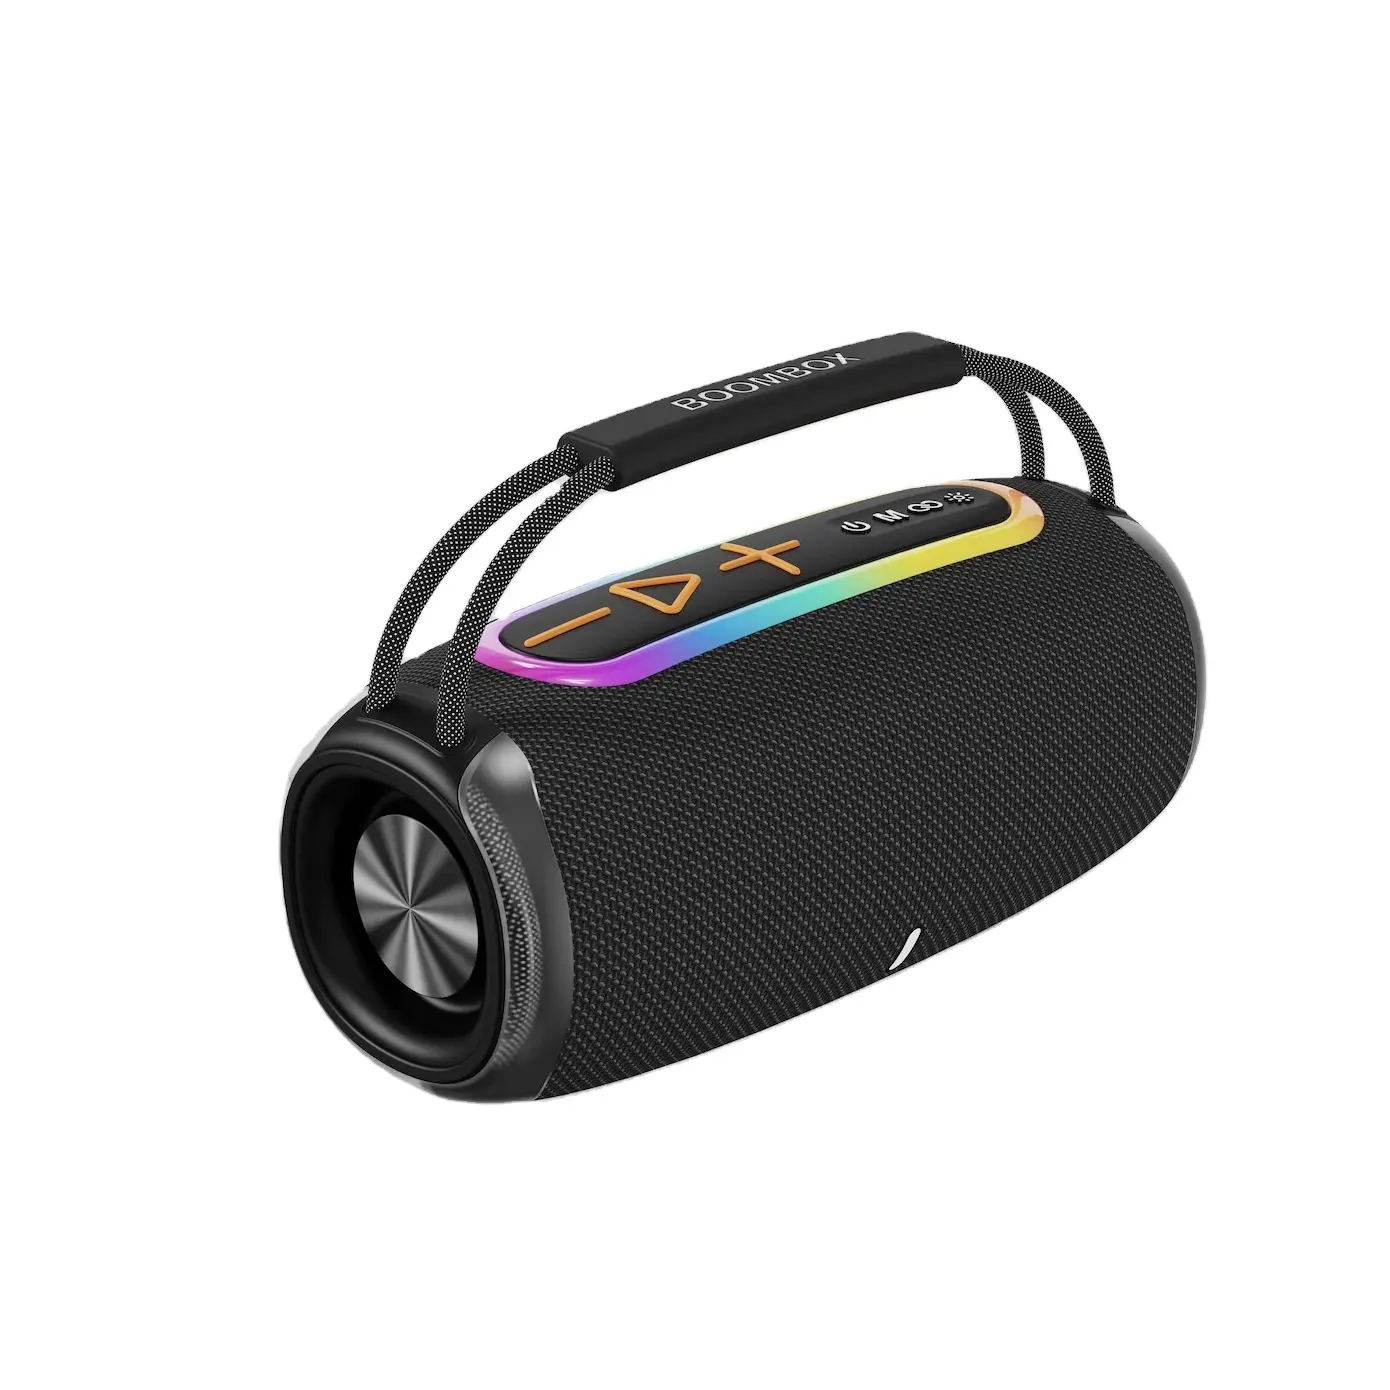 Outdoor Portable Waterpoof Boombox S680 Speaker Subwoofer Bass Party Blue tooth Speaker Wireless Boombox Surround Speakers